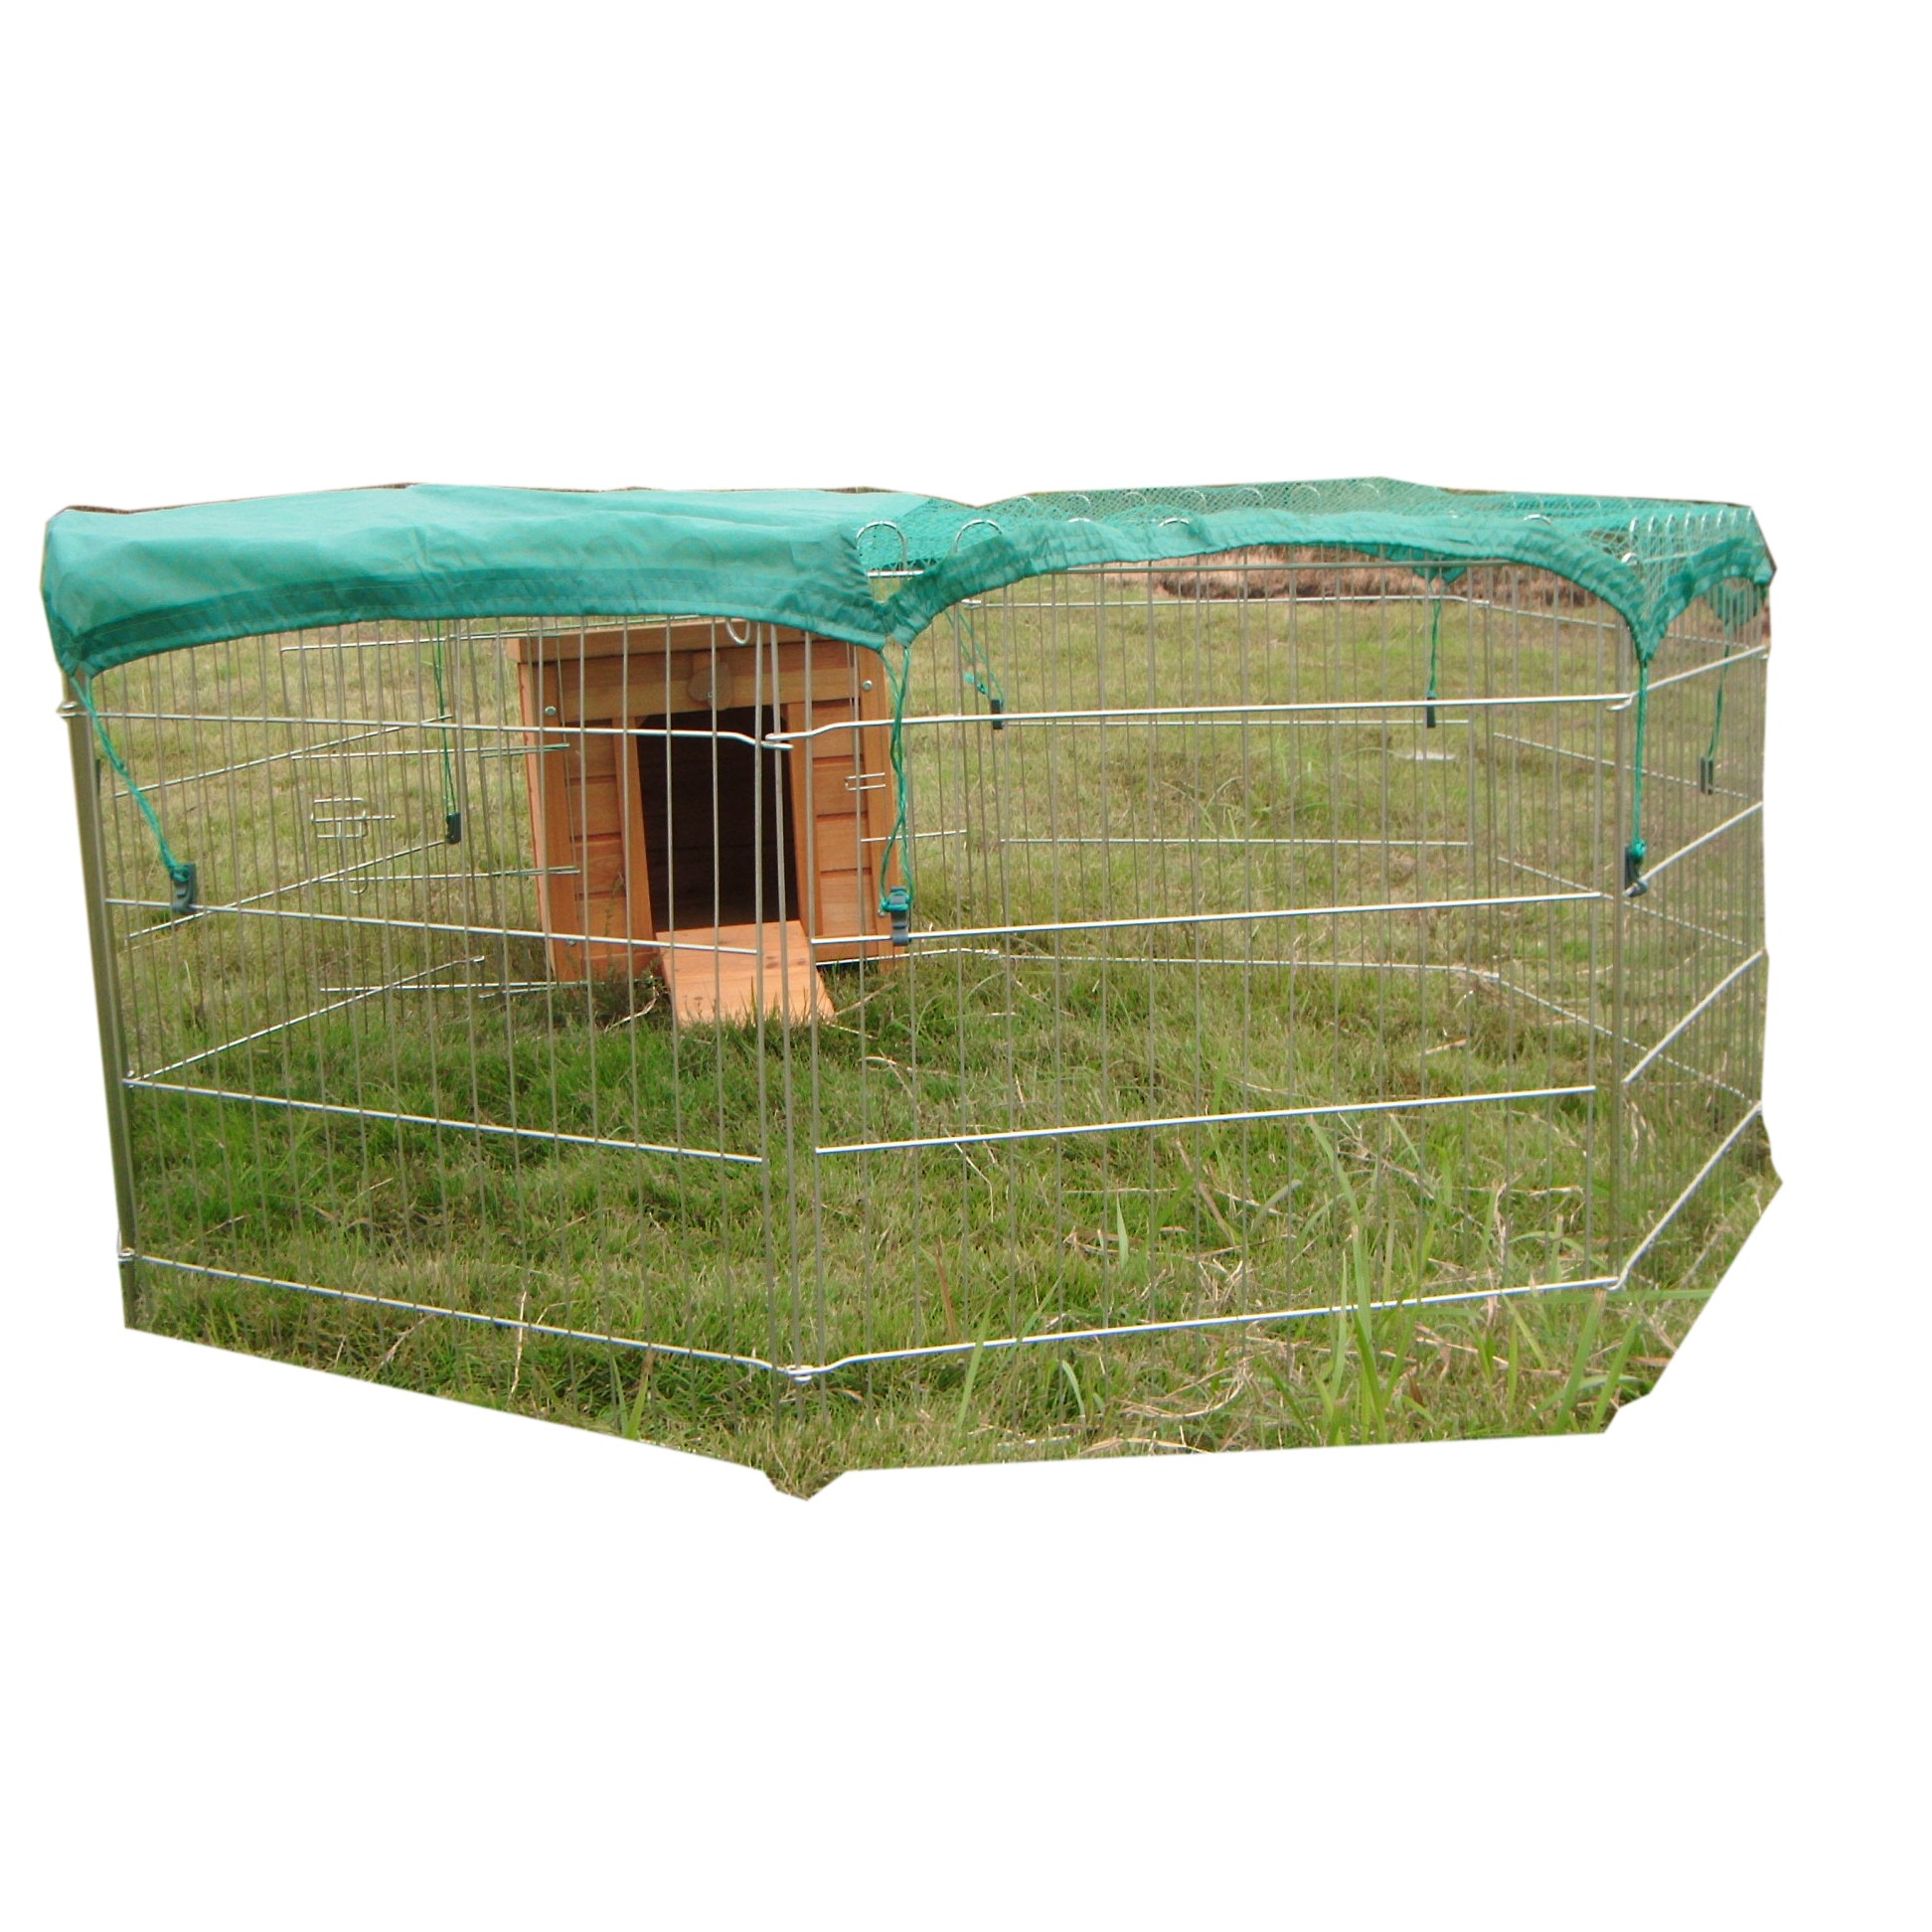 Fast delivery Custom Dog Crates -
 1 x small hide house + 1 x Large Outdoor Octagon 55-inch pet Playpen Enclosure for Rabbit Puppy hutch wire animal Run Cages – Easy